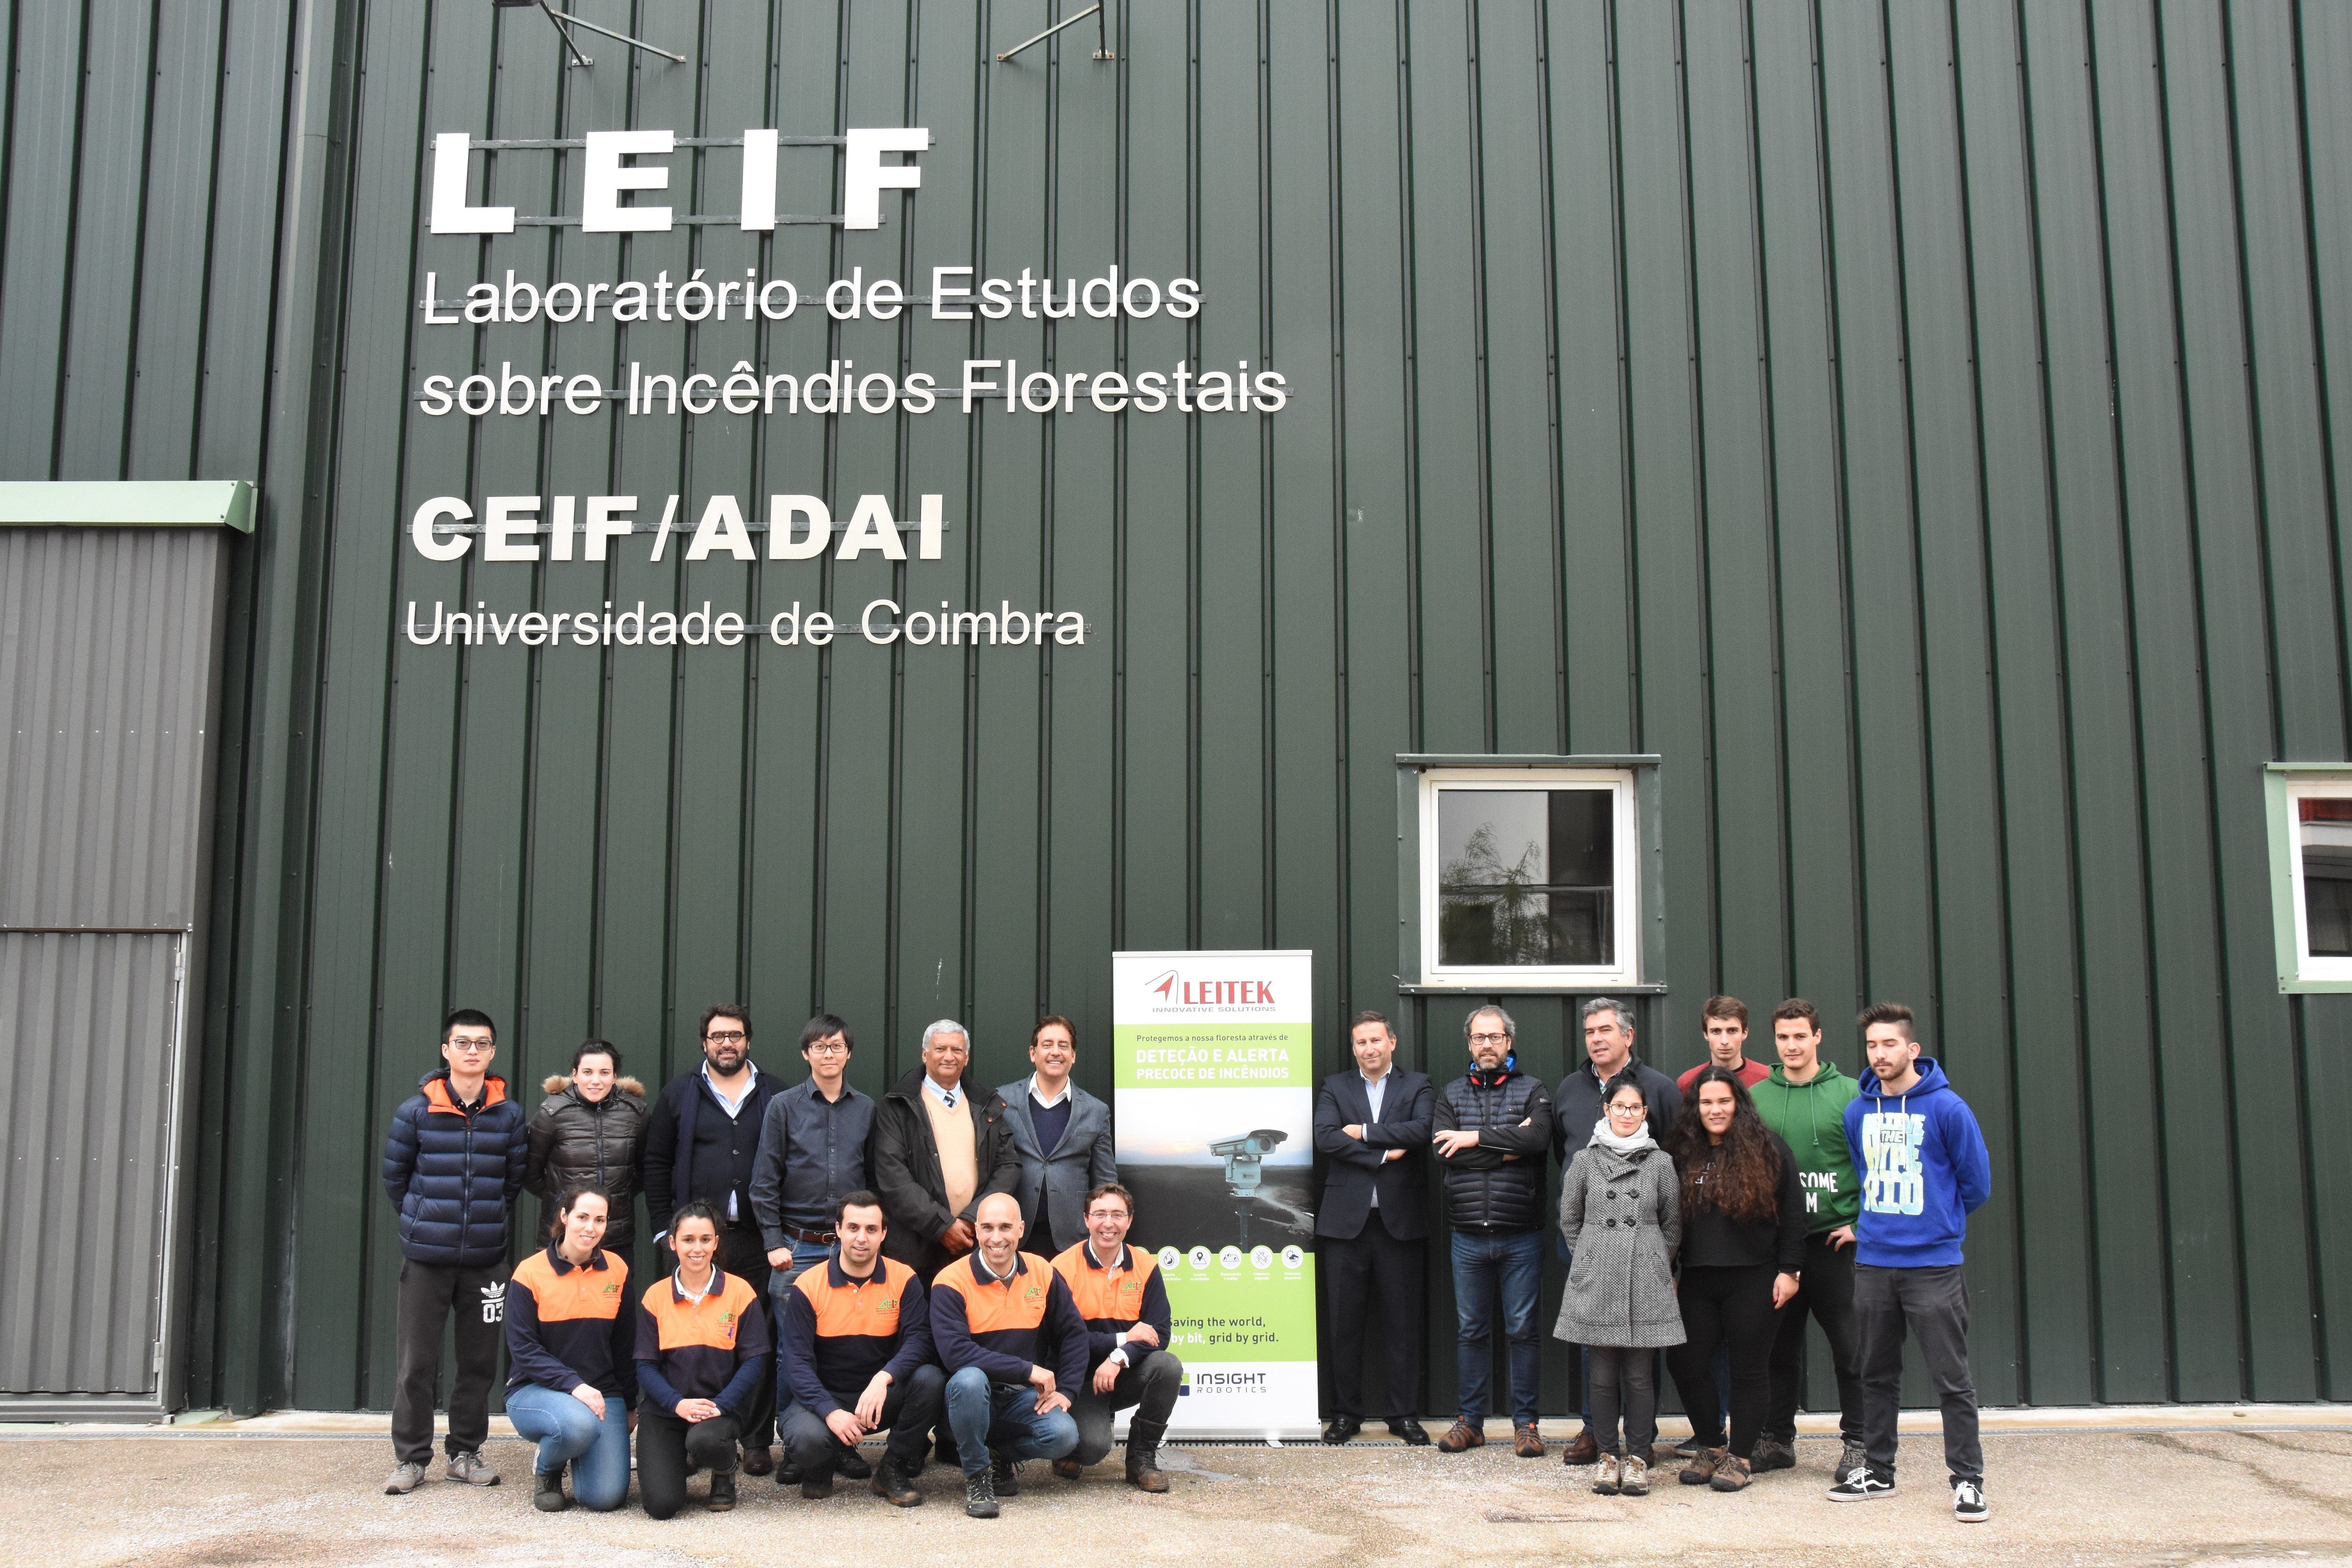 Demonstration done at LEIF in Portugal (March 2018)